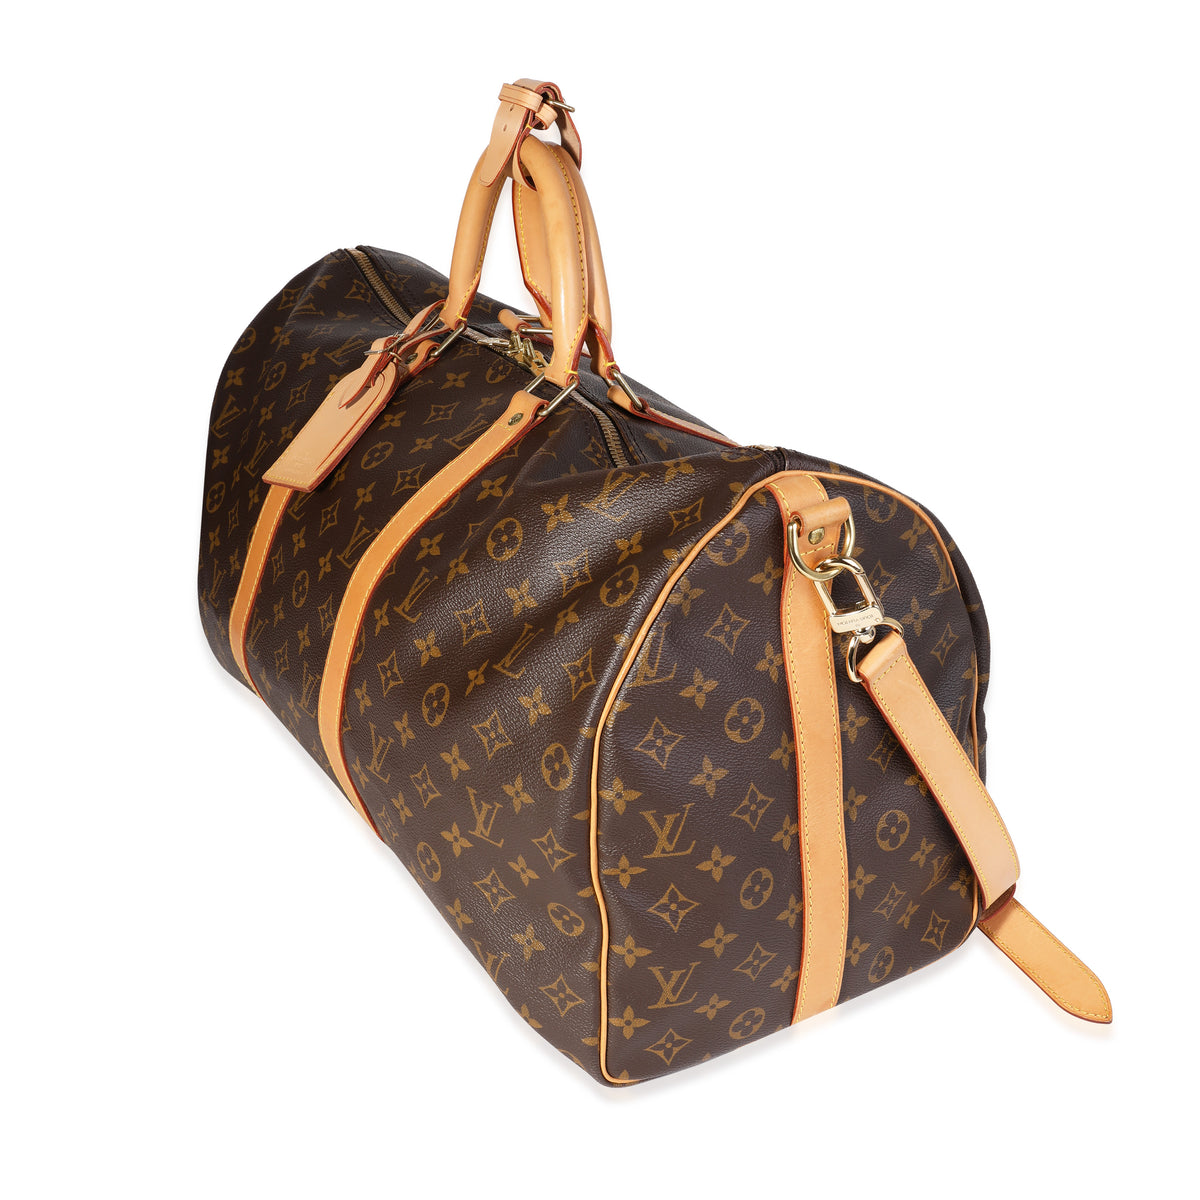 Louis Vuitton Keepall Bag Monogram Canvas 55 Replacing all the